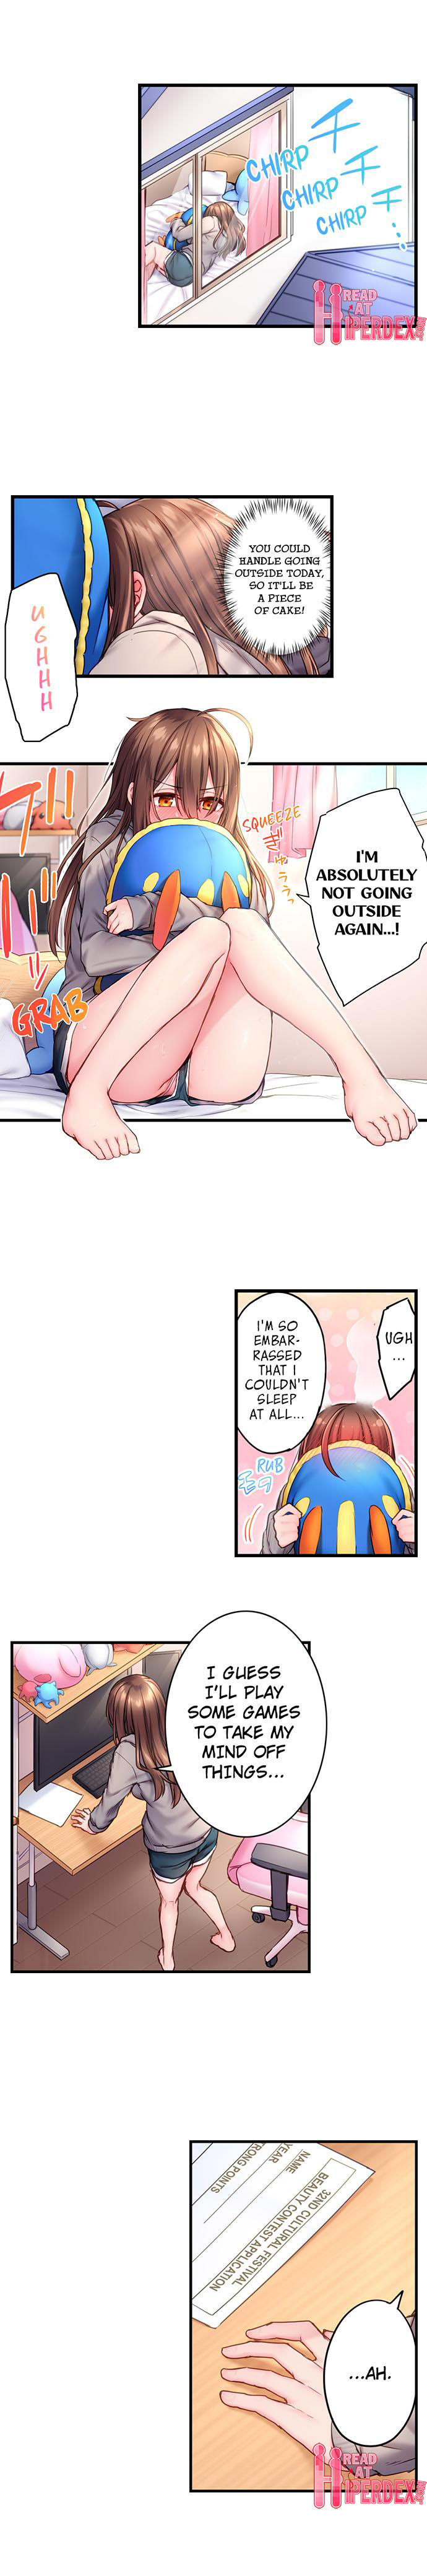 Can’t Believe My Loner Childhood Friend Became This Sexy Girl - Chapter 7 Page 2